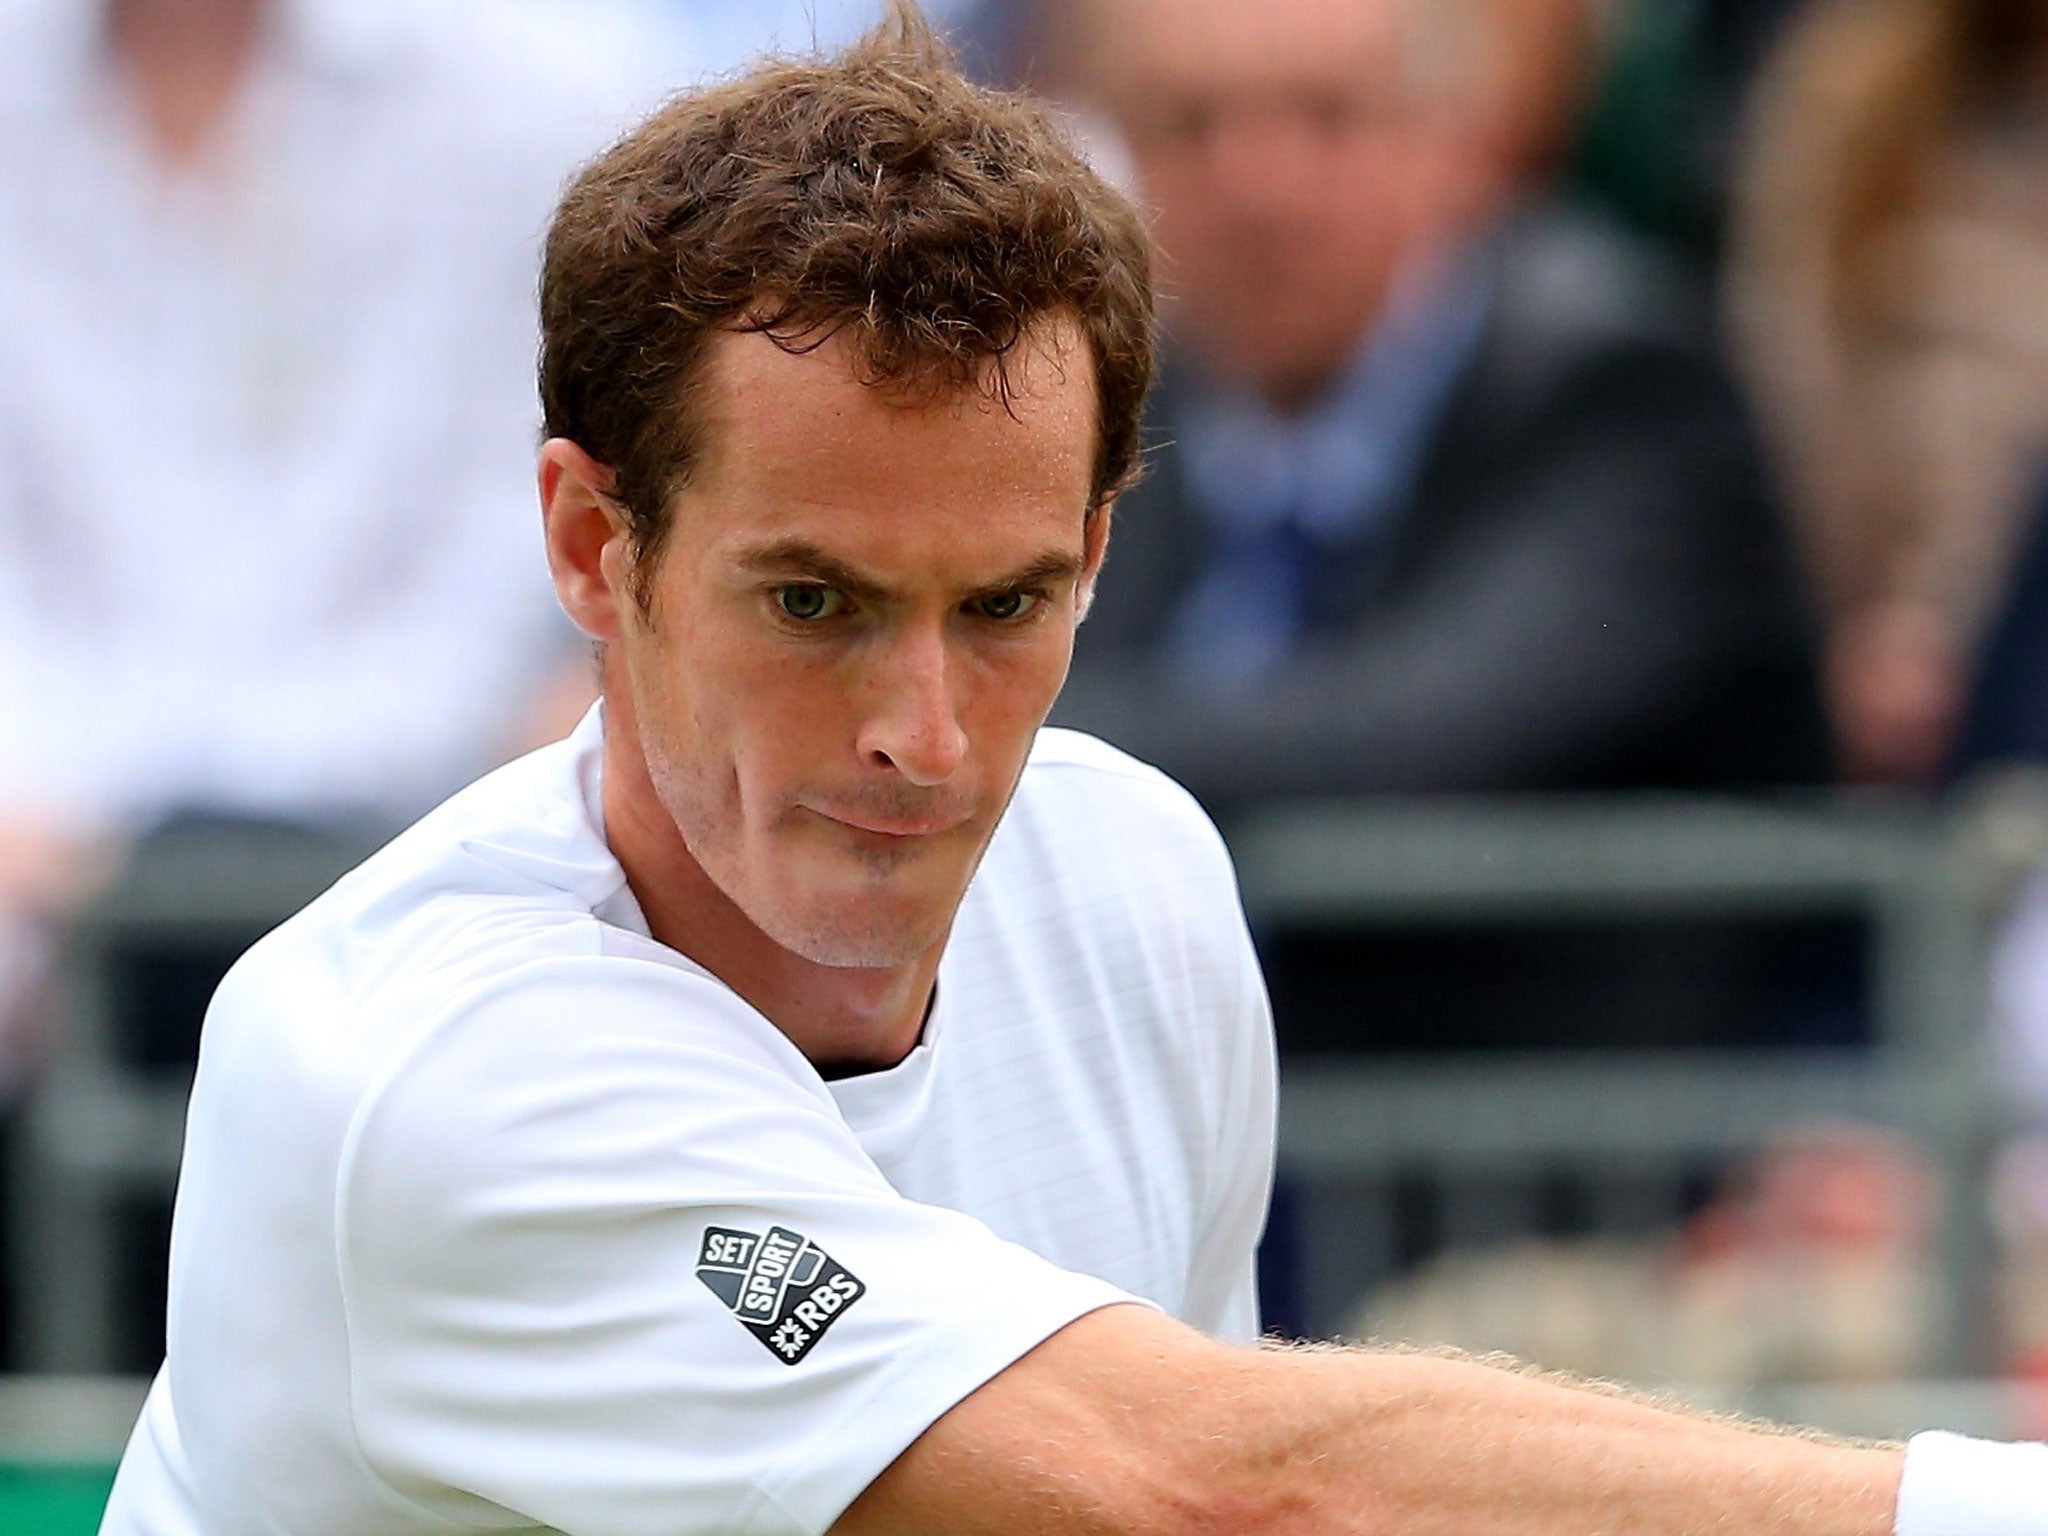 Andy Murray concentrates on his way to a 6-2, 7-6 victory over Kei Nishikori of Japan